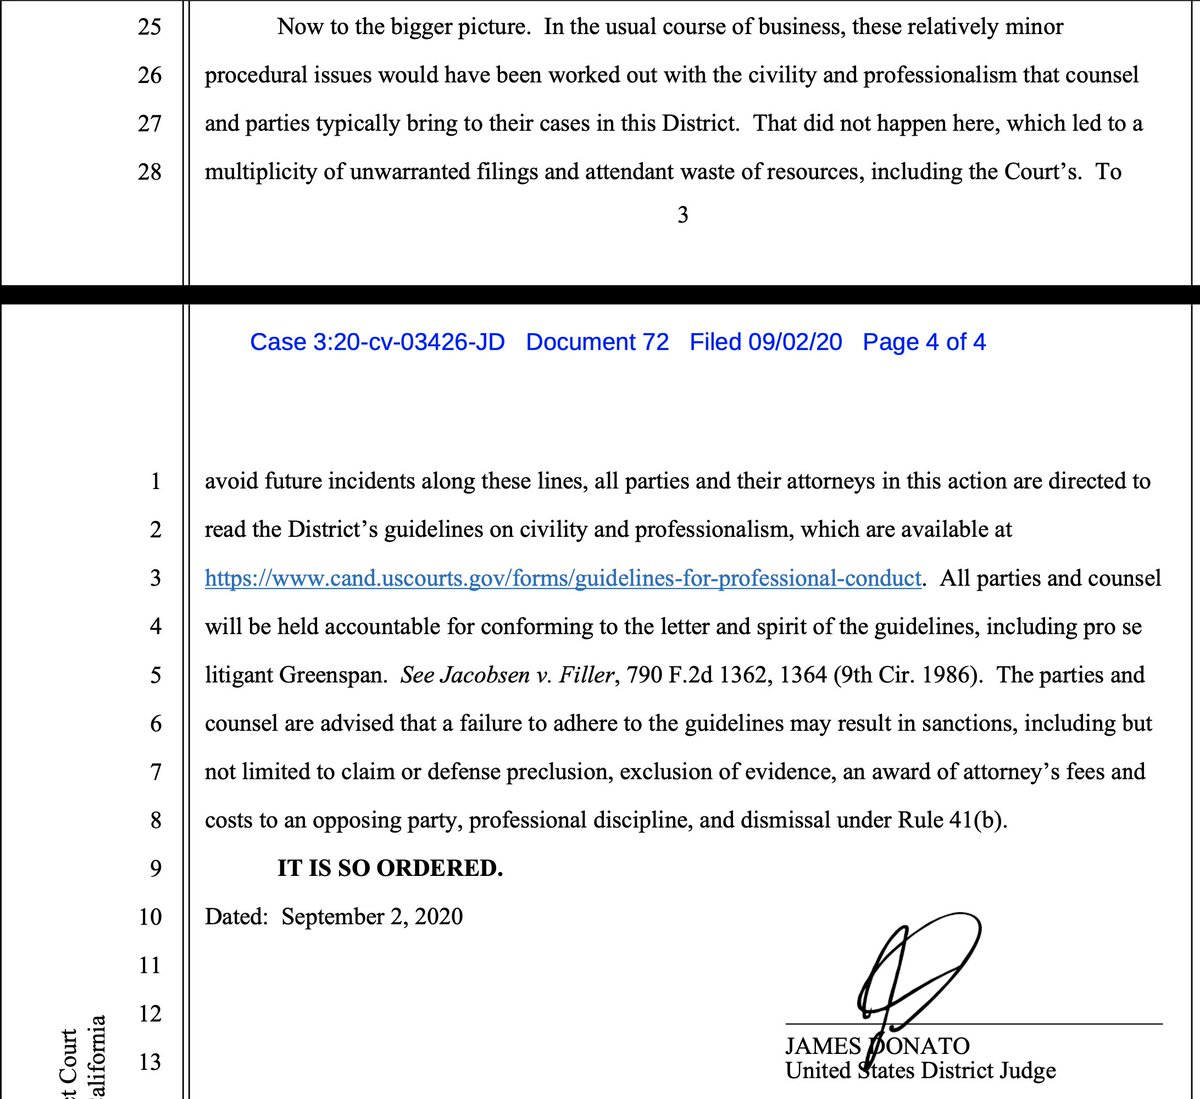 On 9/2, Judge James Donato issued a court order in the case of Greenspan v. Omar Qazi,  @elonmusk, Tesla and Smick.He admonished Greenspan for playing dirty and warned him:Failure to be civil in court could result in dismissal, professional discipline, and paying Omar's costs